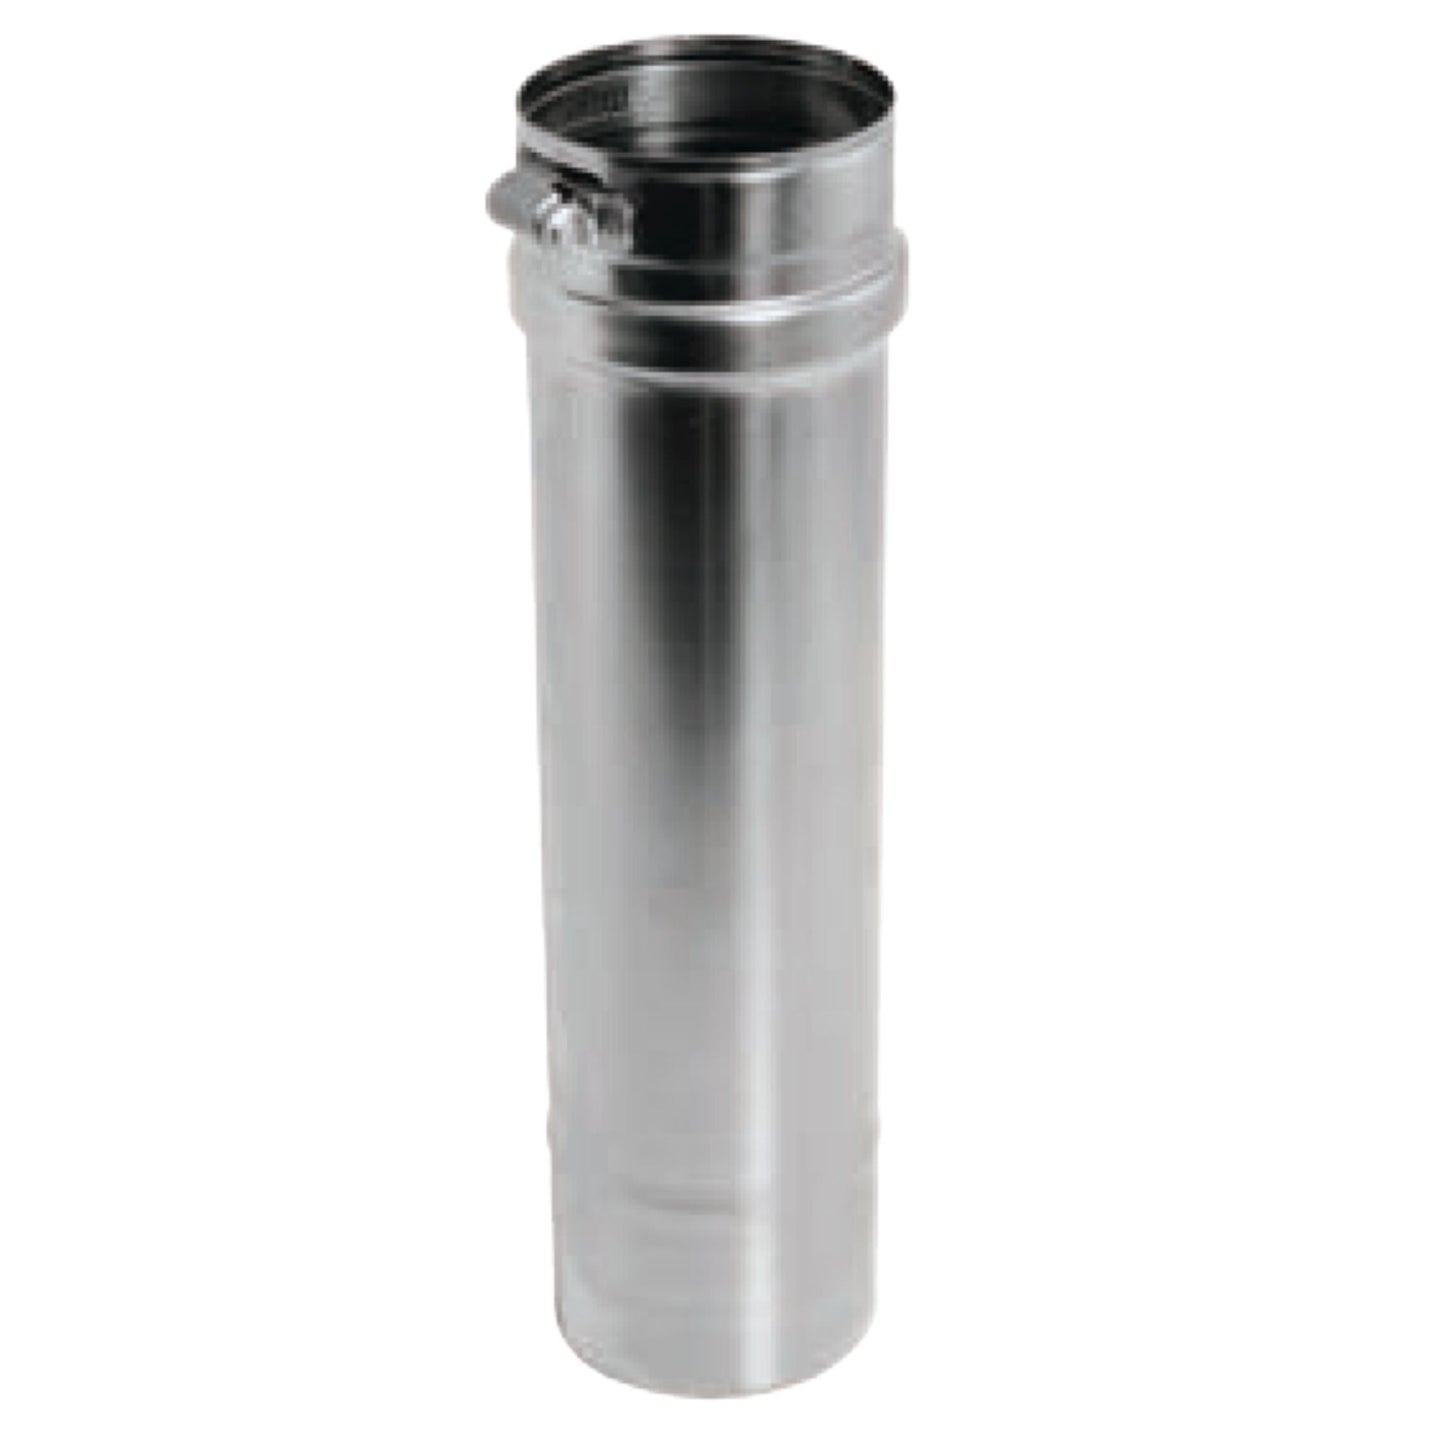 DuraVent FasNSeal 9" x 18" 316L Stainless Steel Vent Length